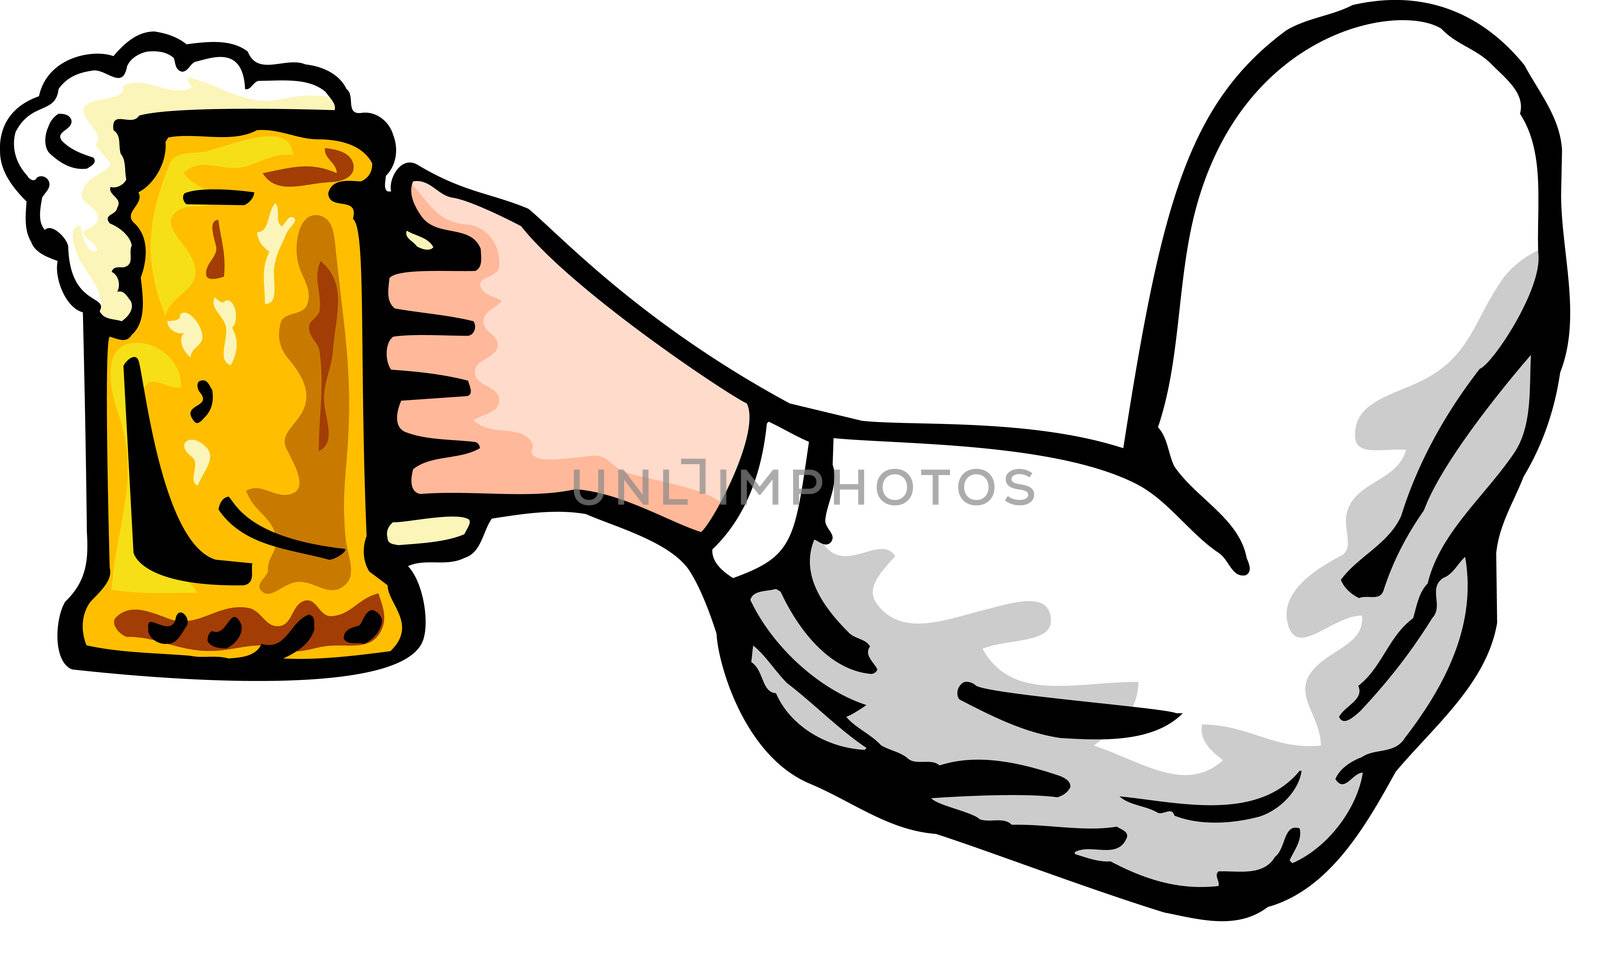 illustration of a hand holding beer mug viewed from side on isolated background